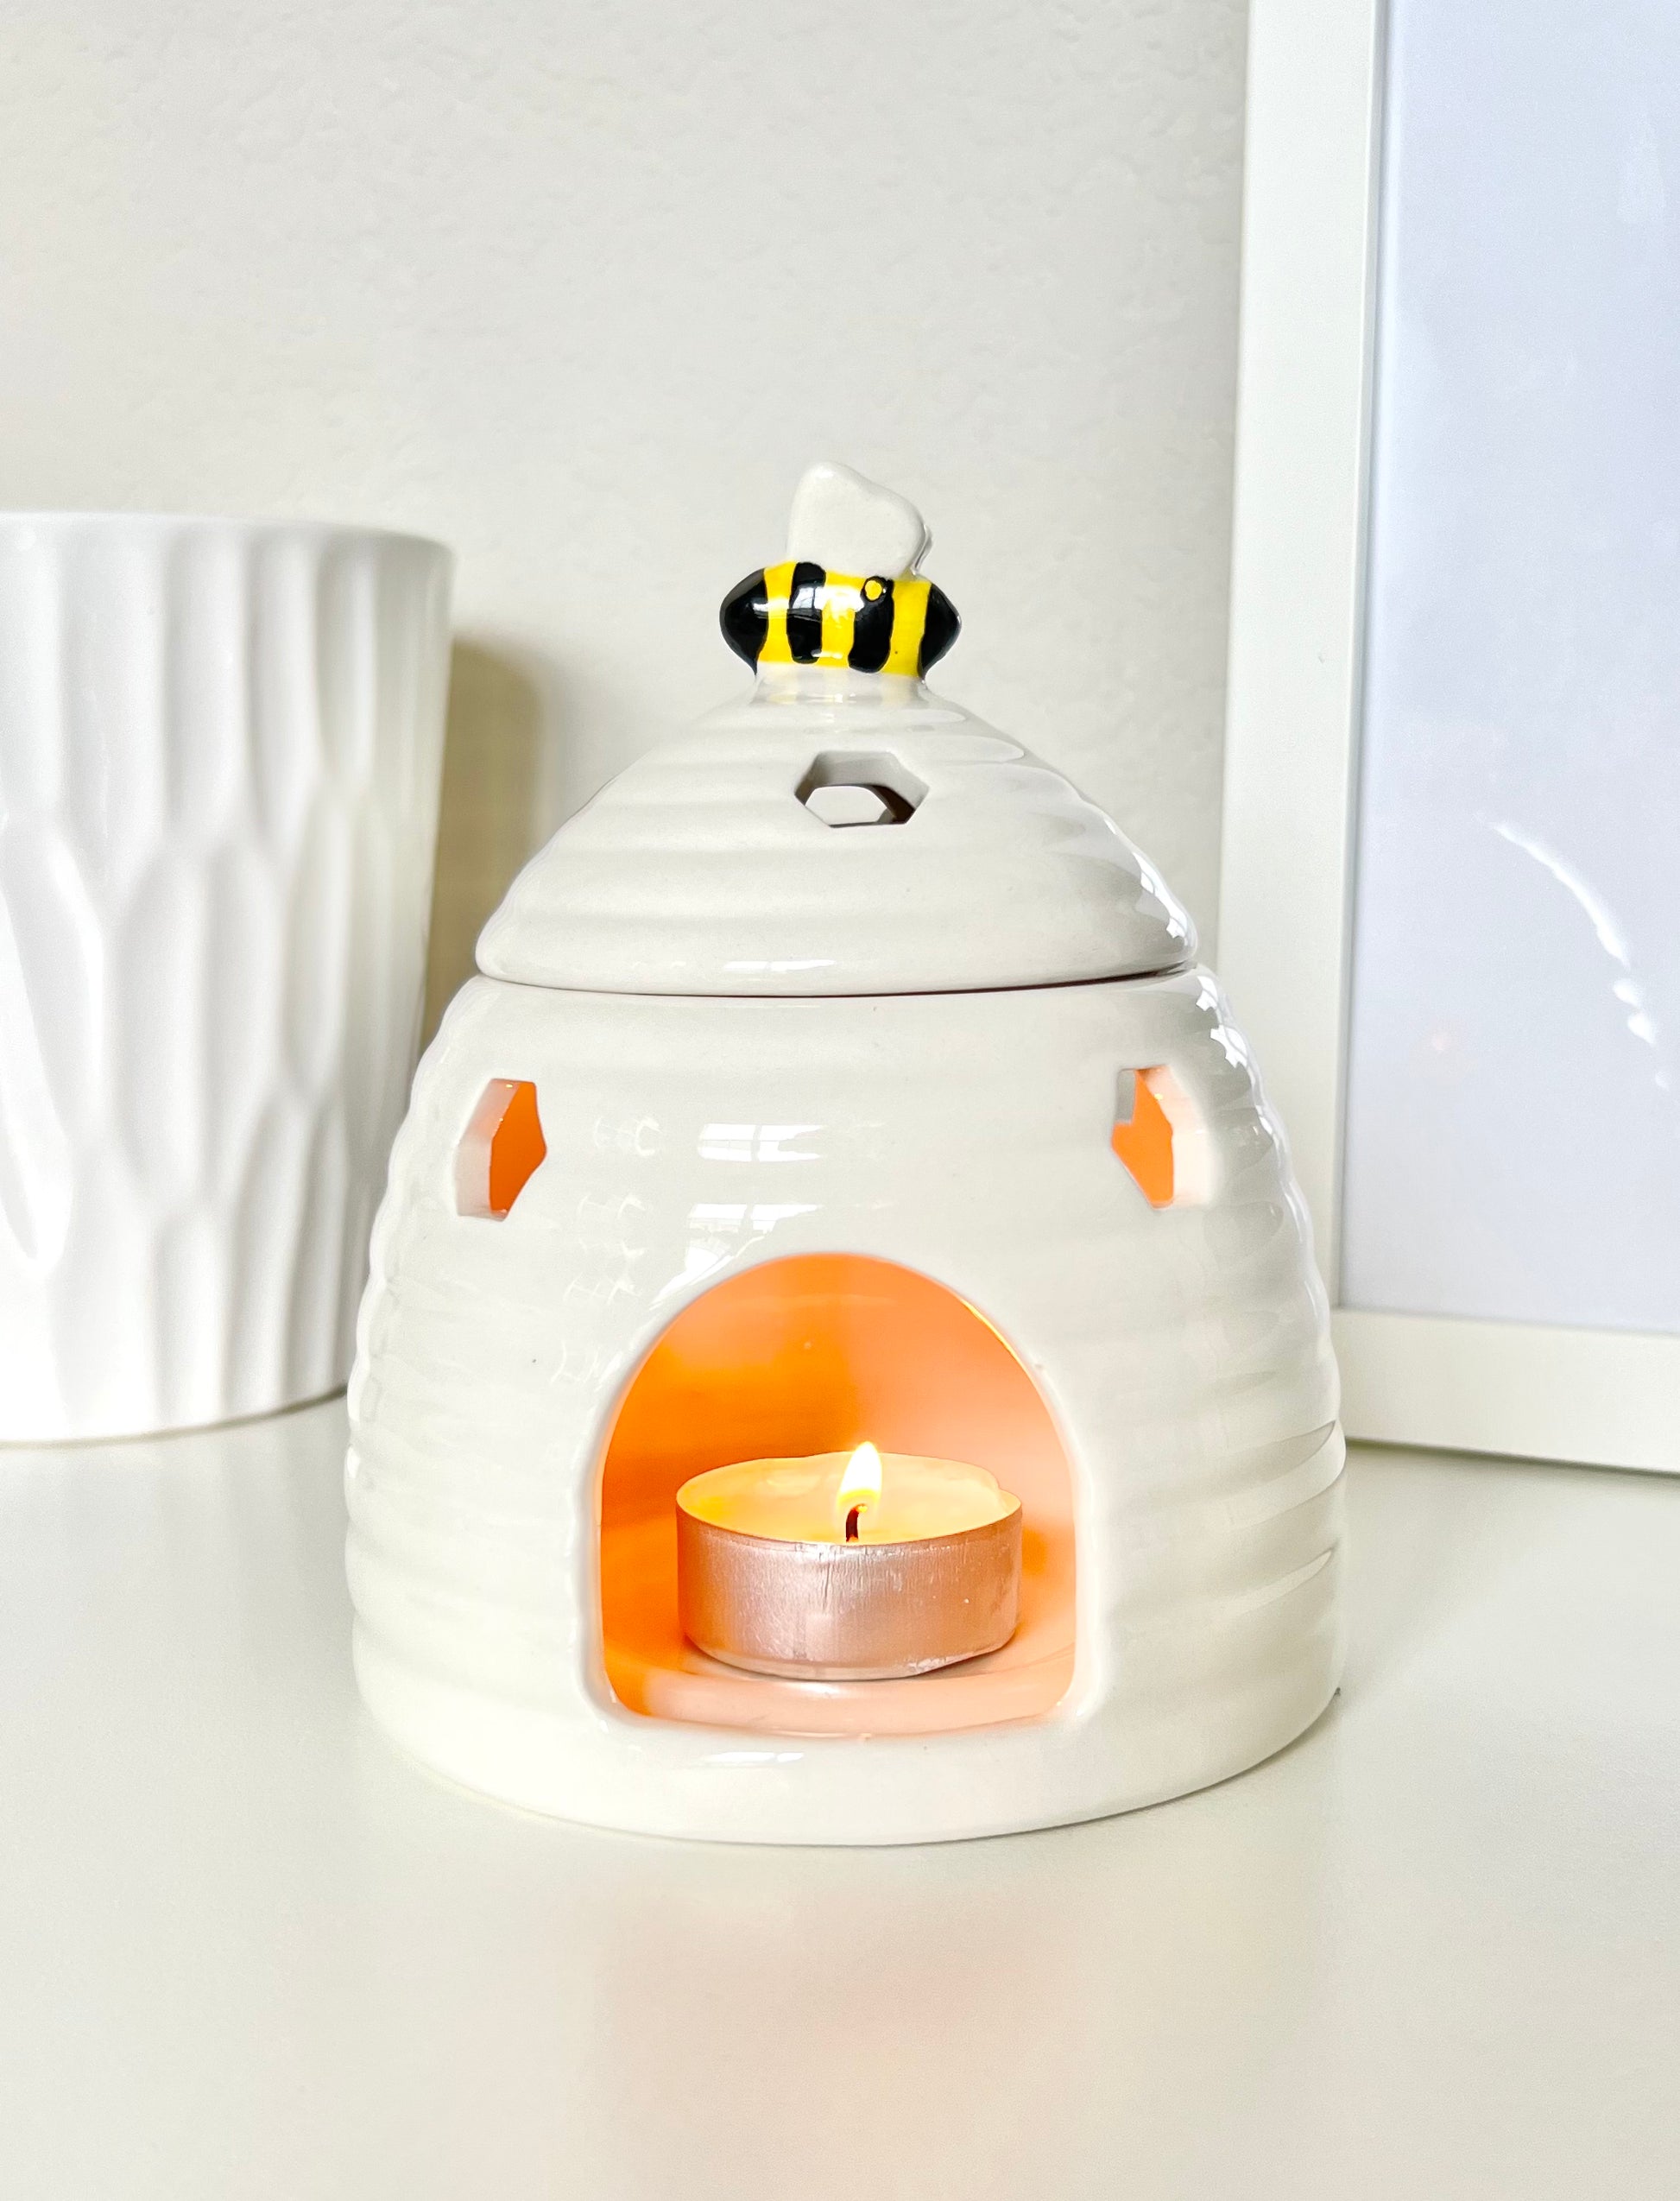 Should I use a Tealight or Electric Wax Warmer? – Cosy Aromas